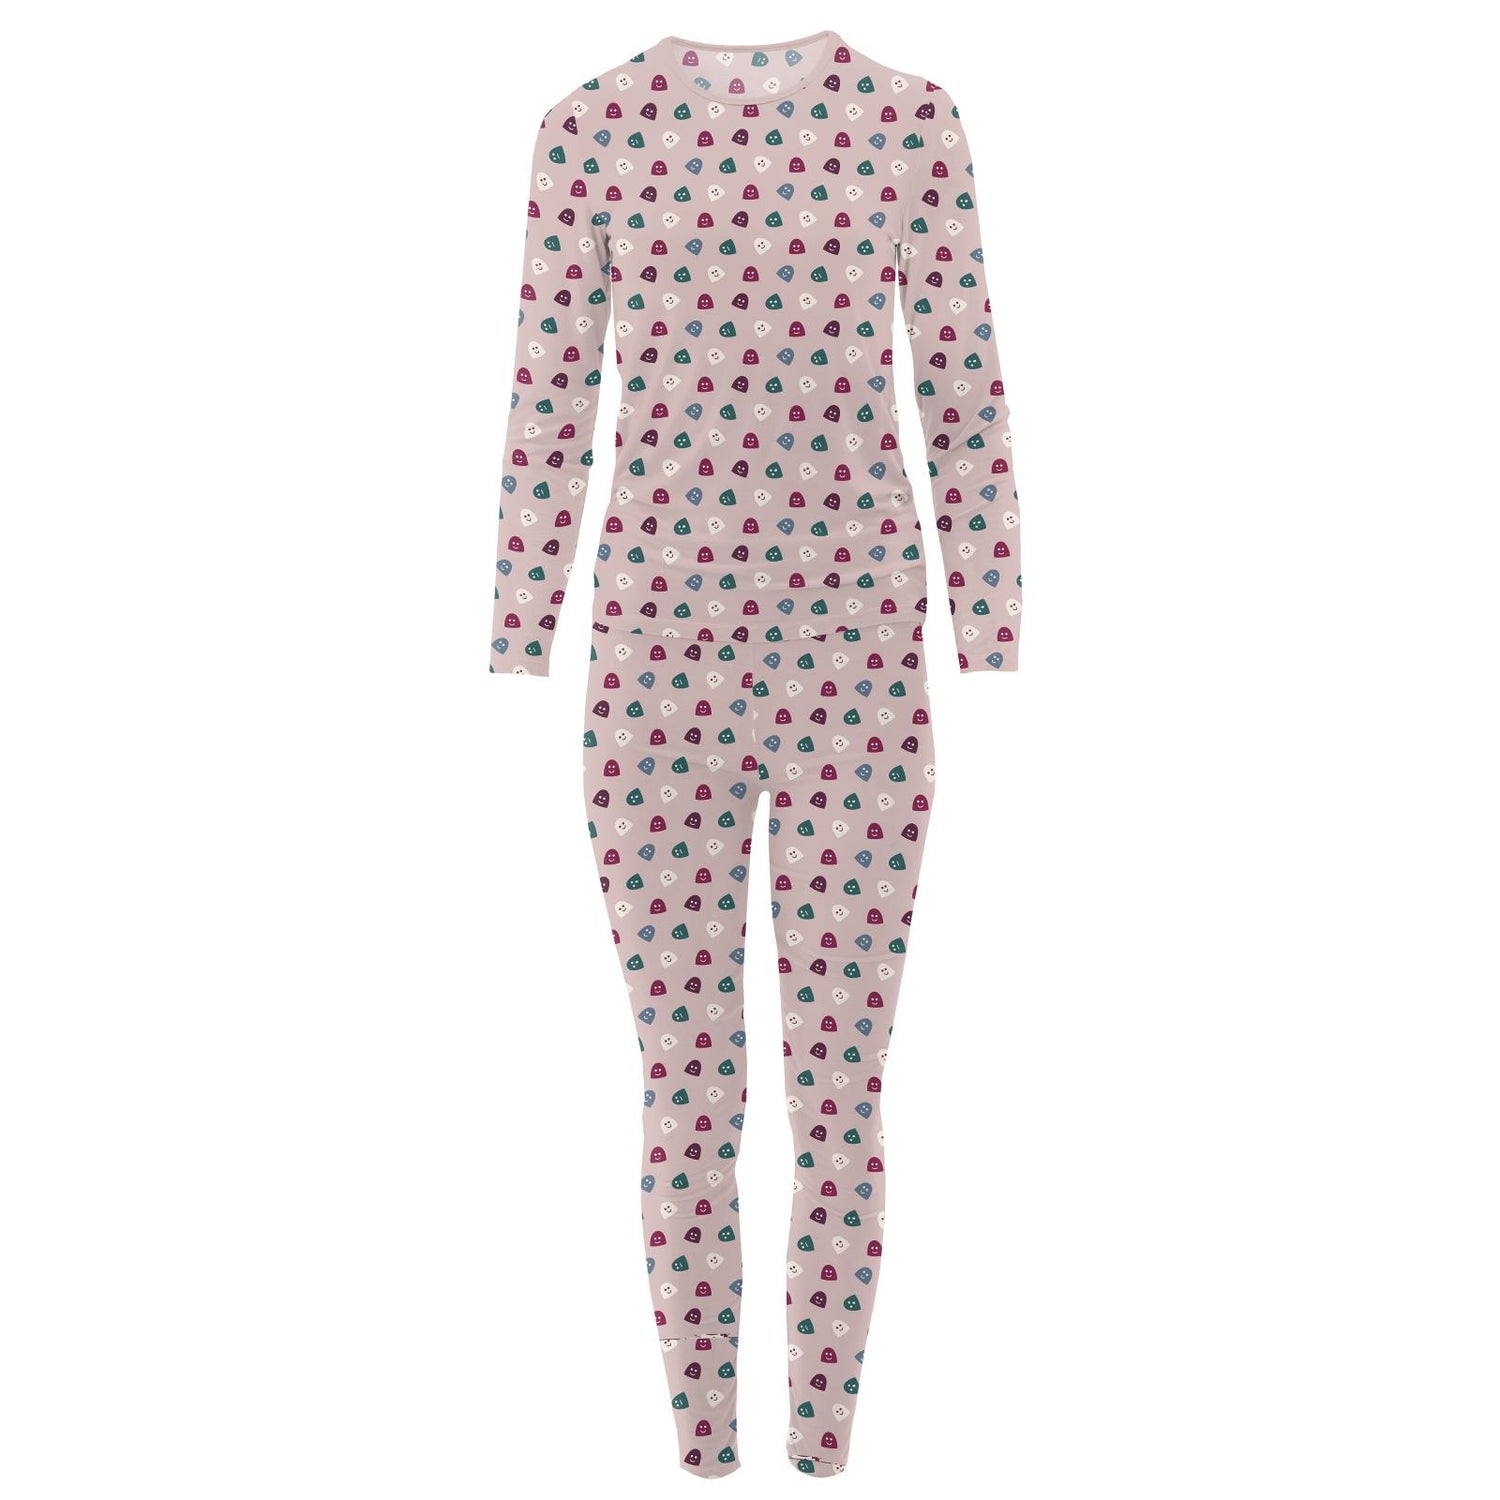 Women's Print Long Sleeve Fitted Pajama Set in Baby Rose Happy Gumdrops